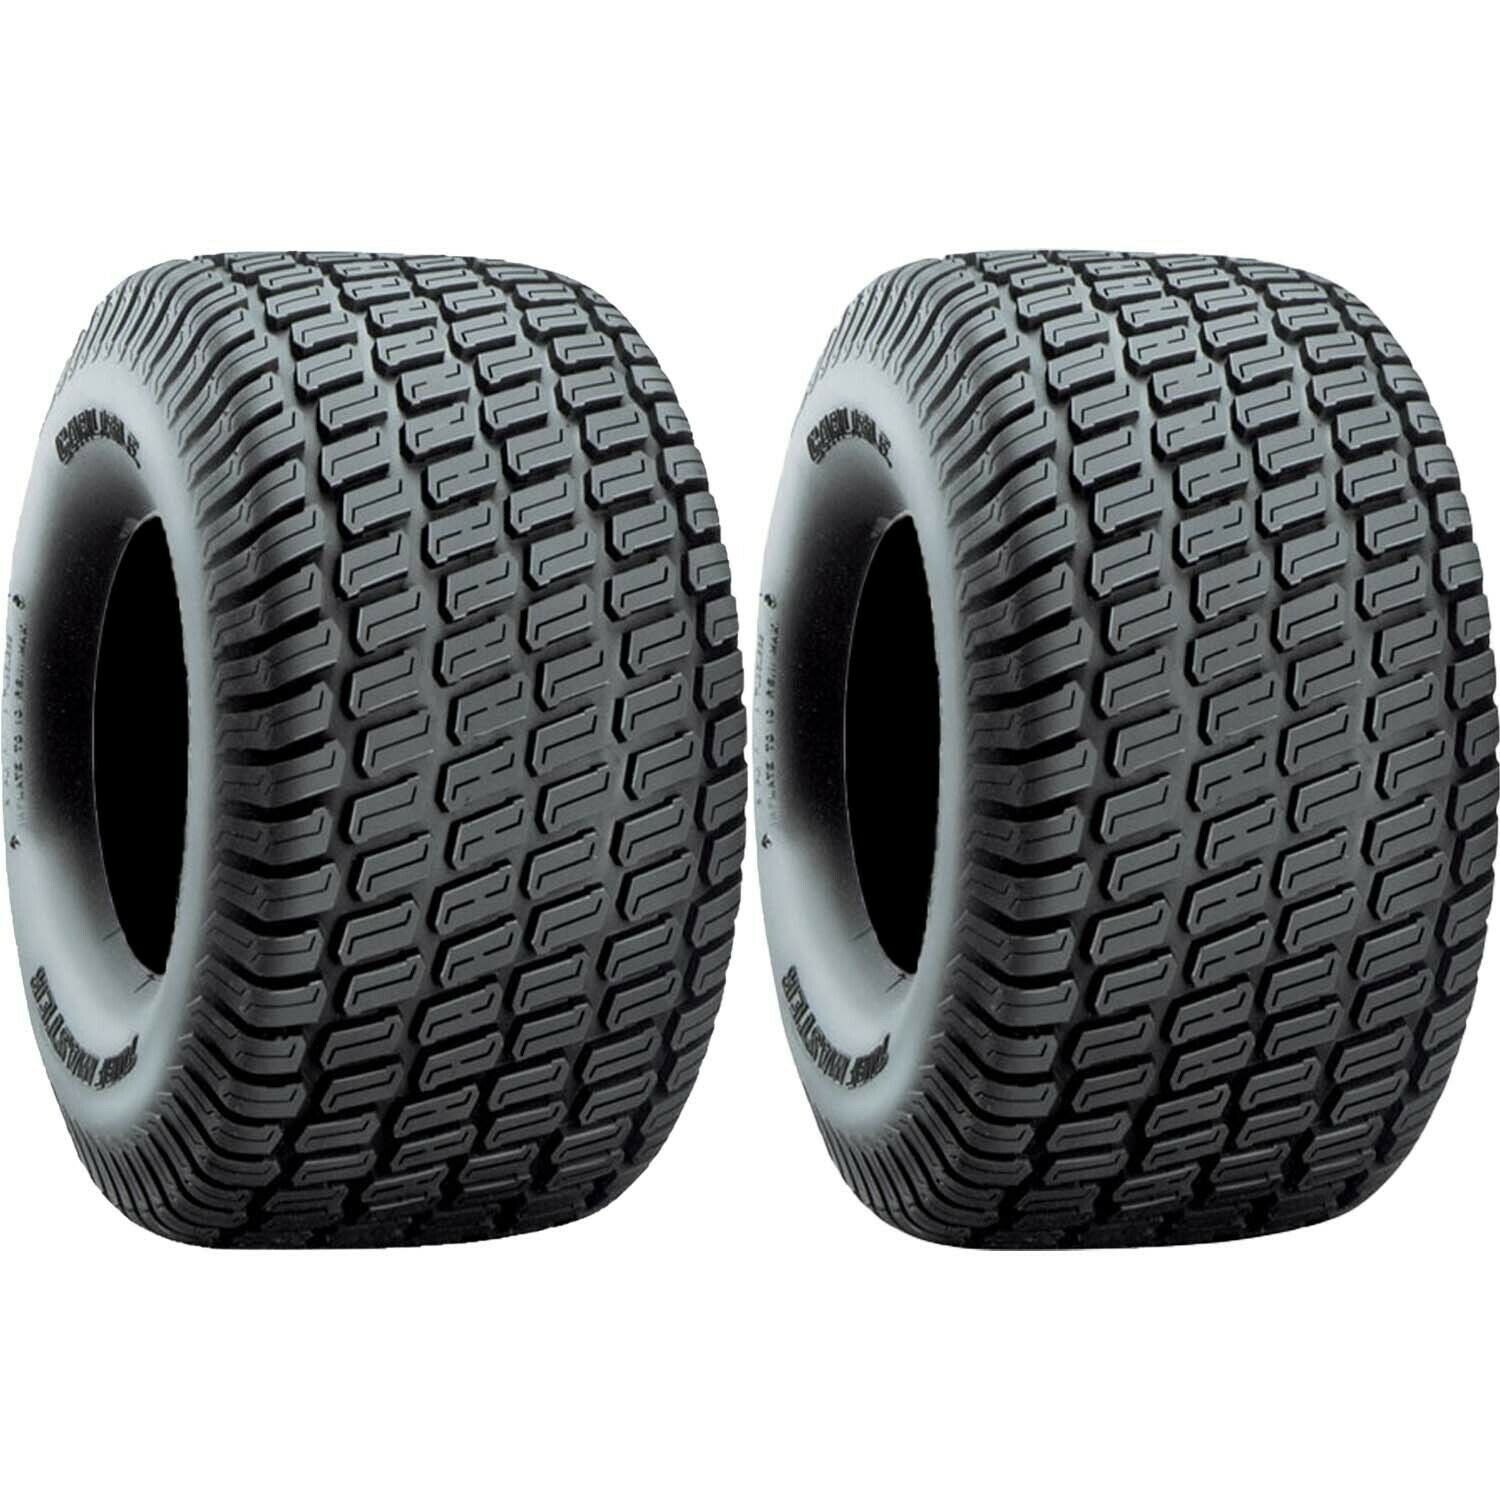 Carlisle Turf Master Lawn and Garden Tire 4Ply 23x9.50-12 Pack of 2